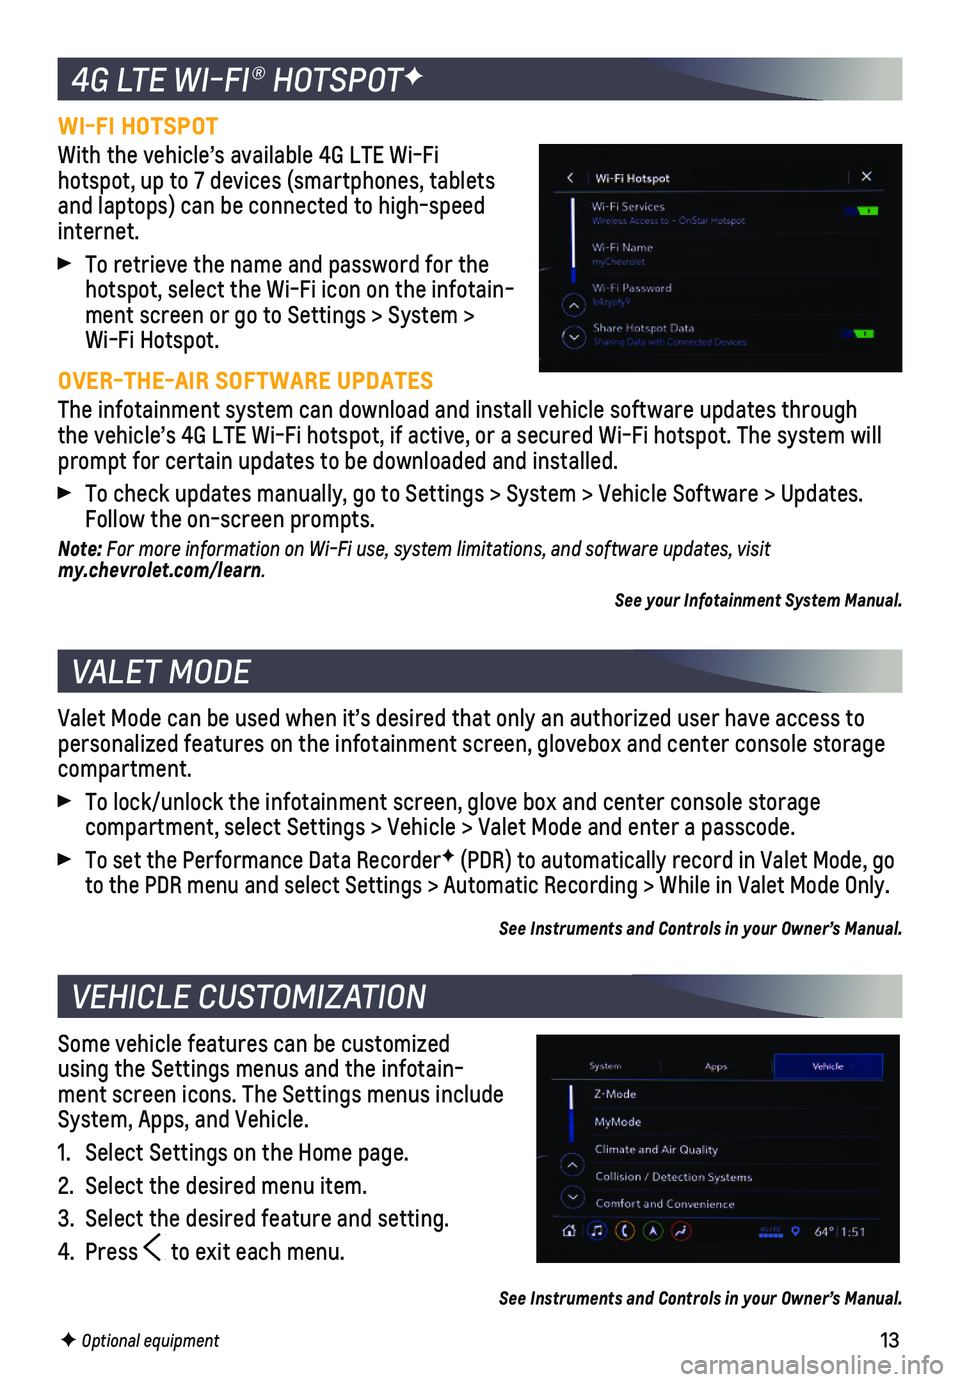 CHEVROLET CORVETTE 2020  Get To Know Guide 13
WI-FI HOTSPOT
With the vehicle’s available 4G LTE Wi-Fi hotspot, up to 7 devices (smartphones, tablets and laptops) can be connected to high-speed internet. 
 To retrieve the name and password fo